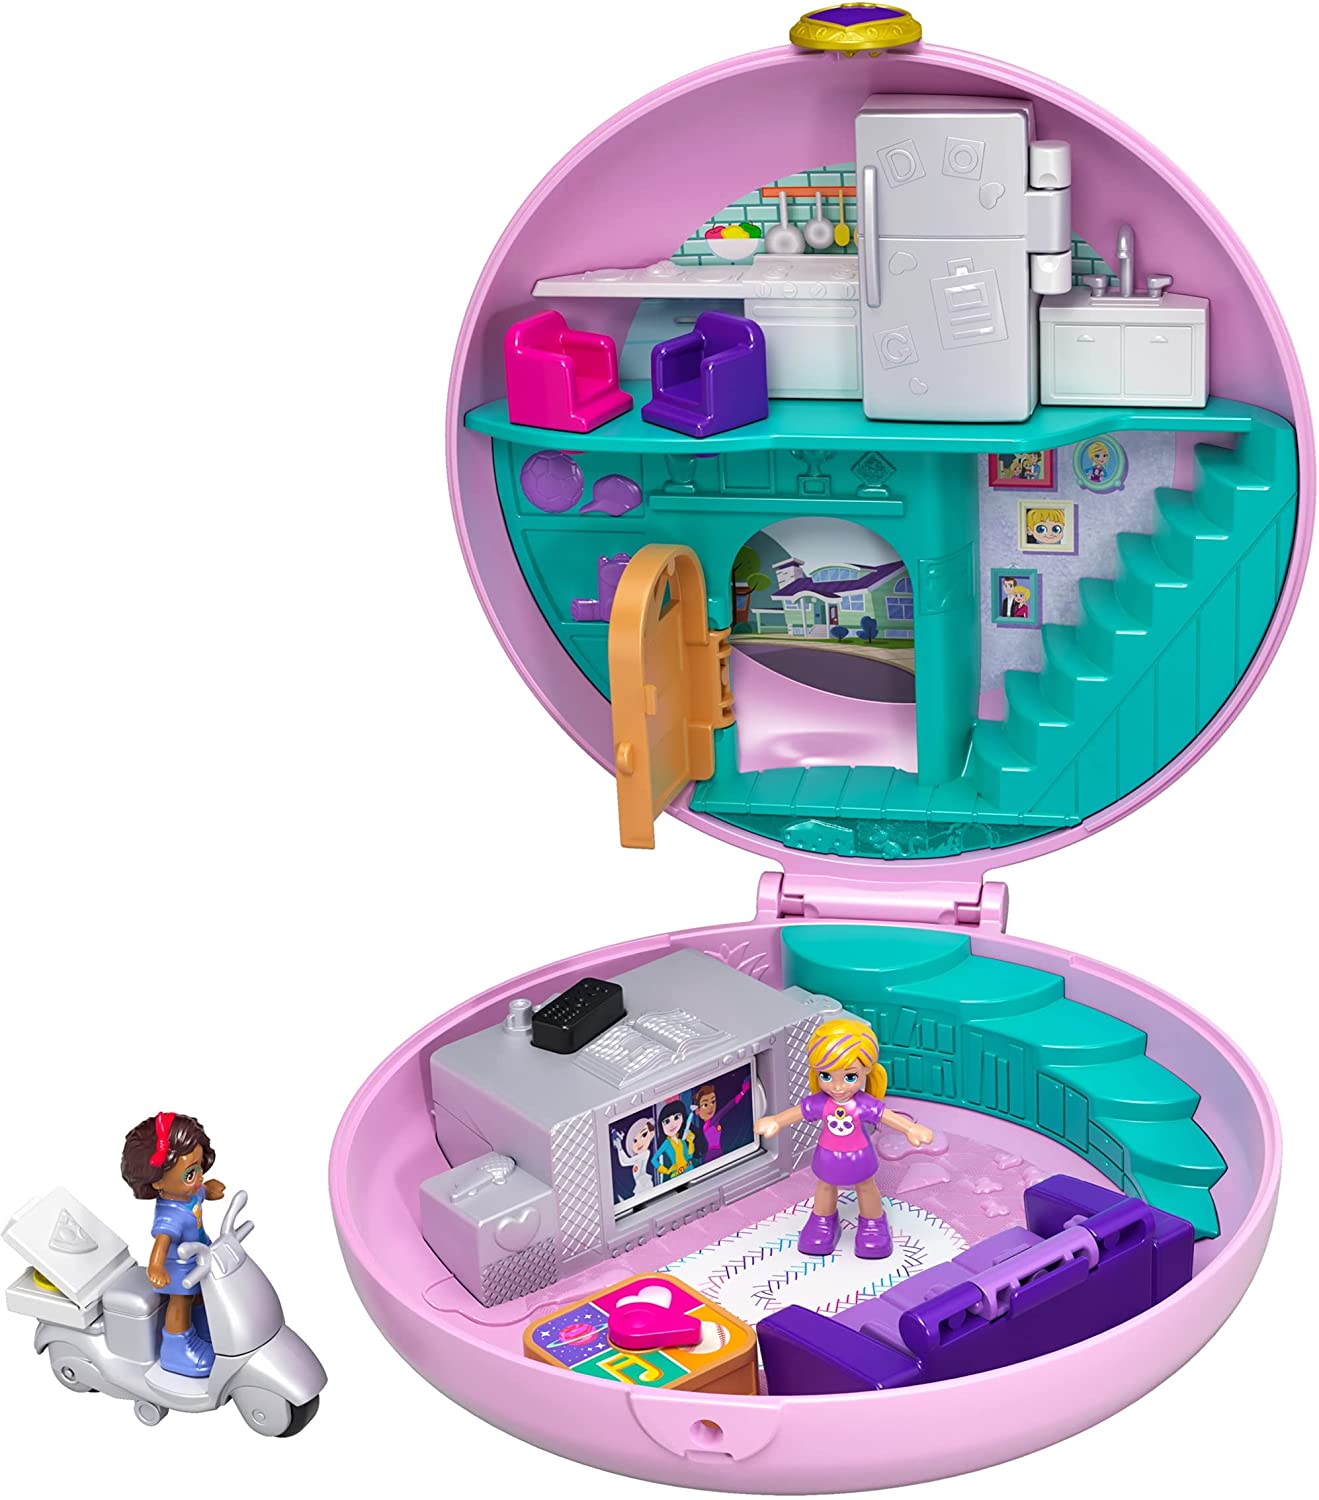 Bring Back Some Old-School Toys and We’ll Guess Your Age With Surprising Accuracy Polly Pocket